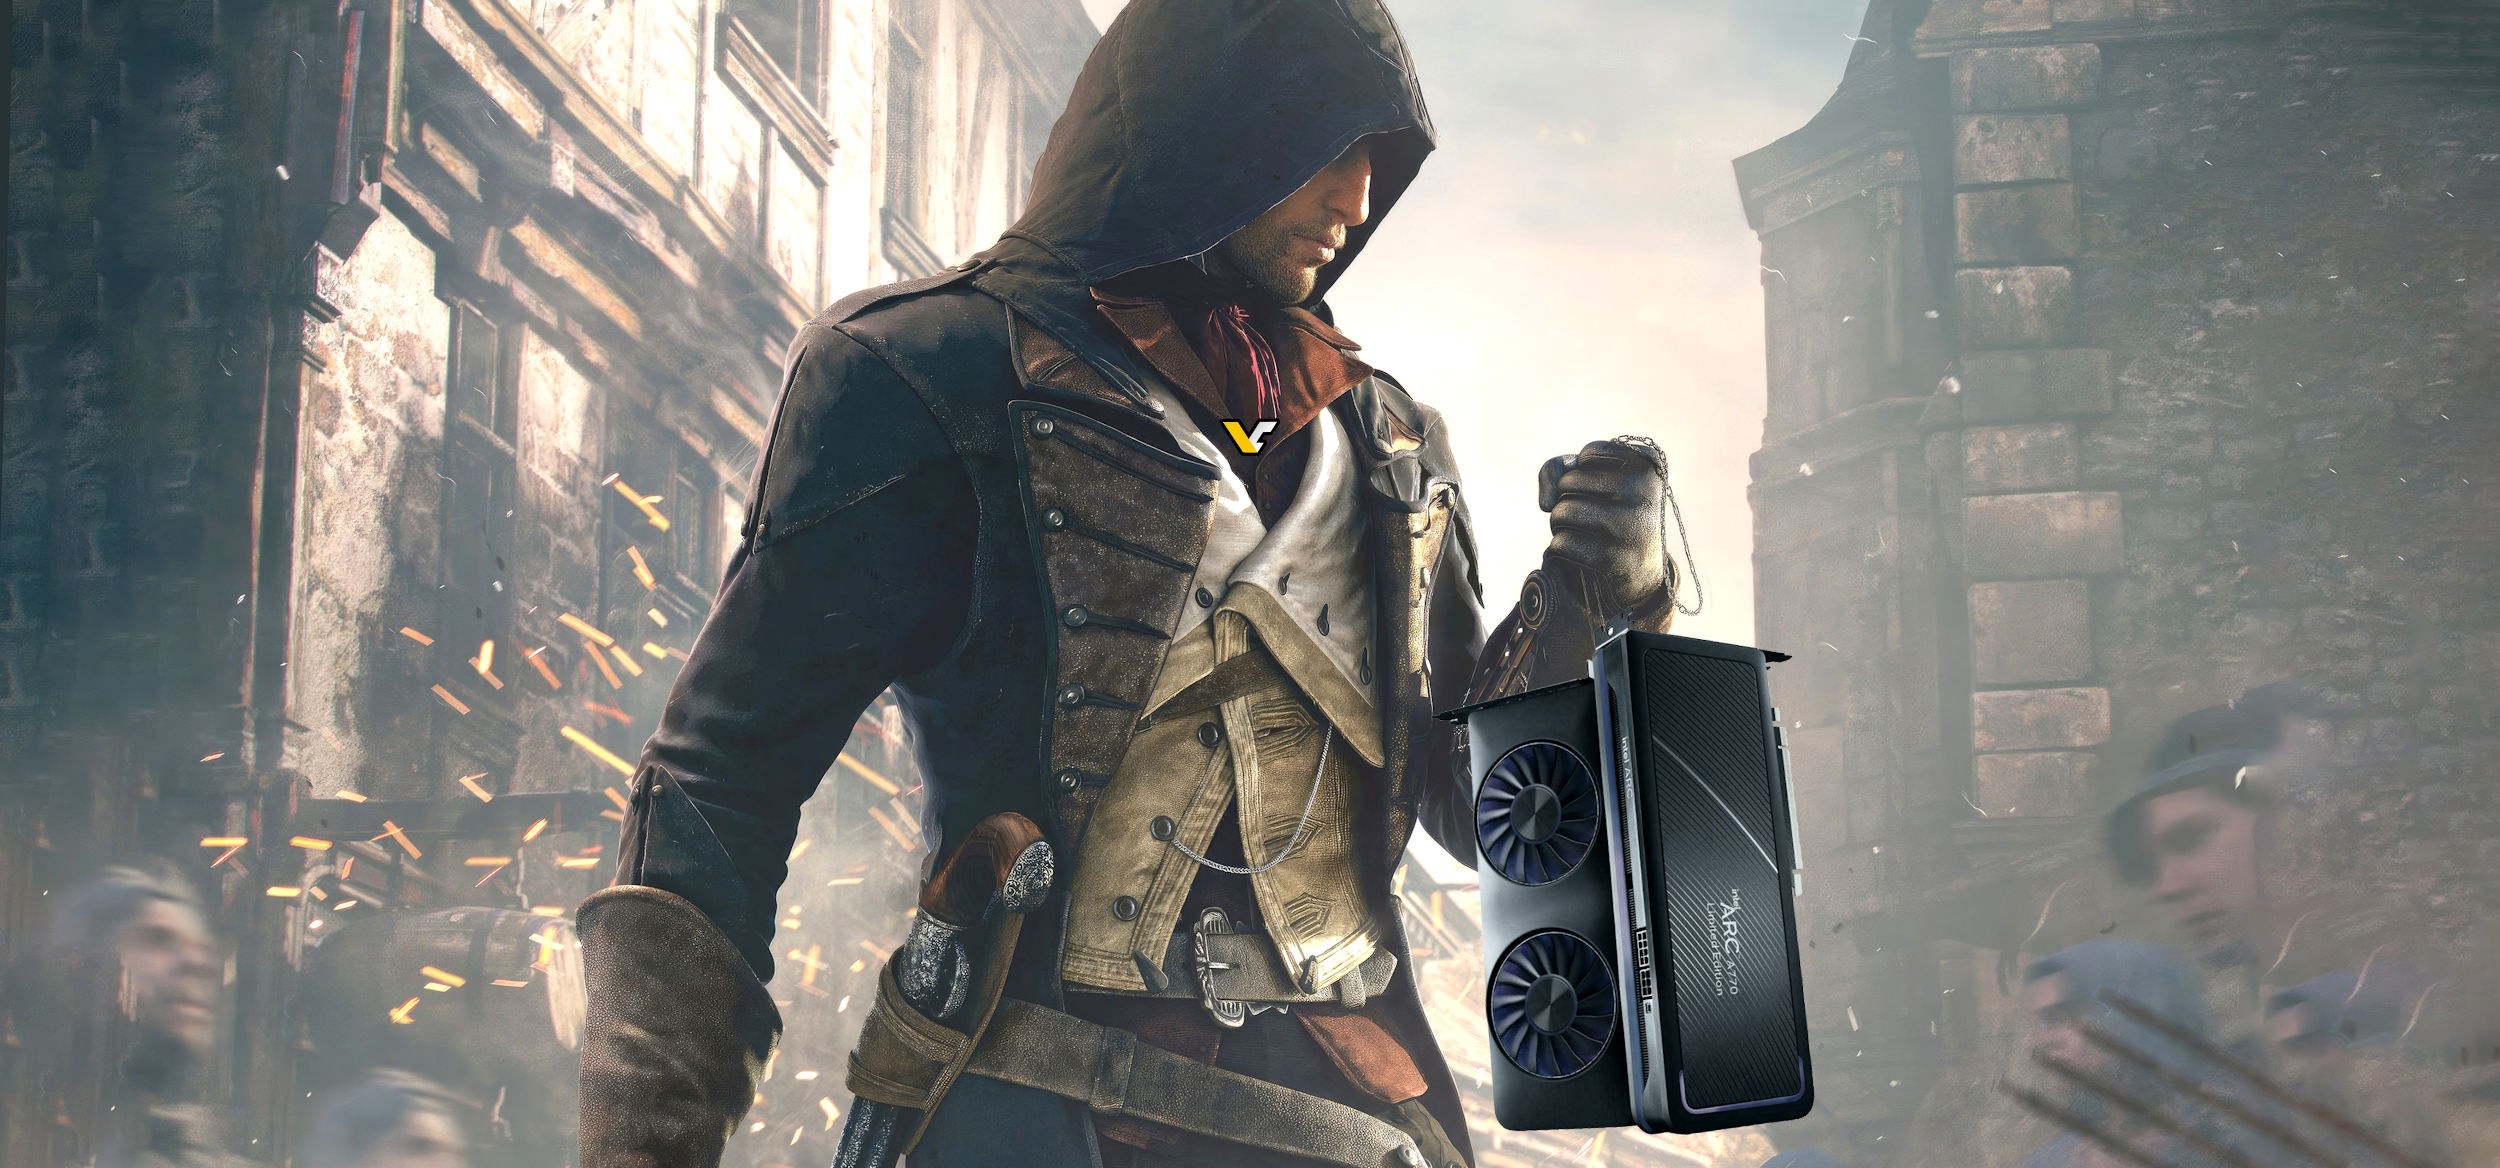 Best Assassin's Creed games for low-end PCs